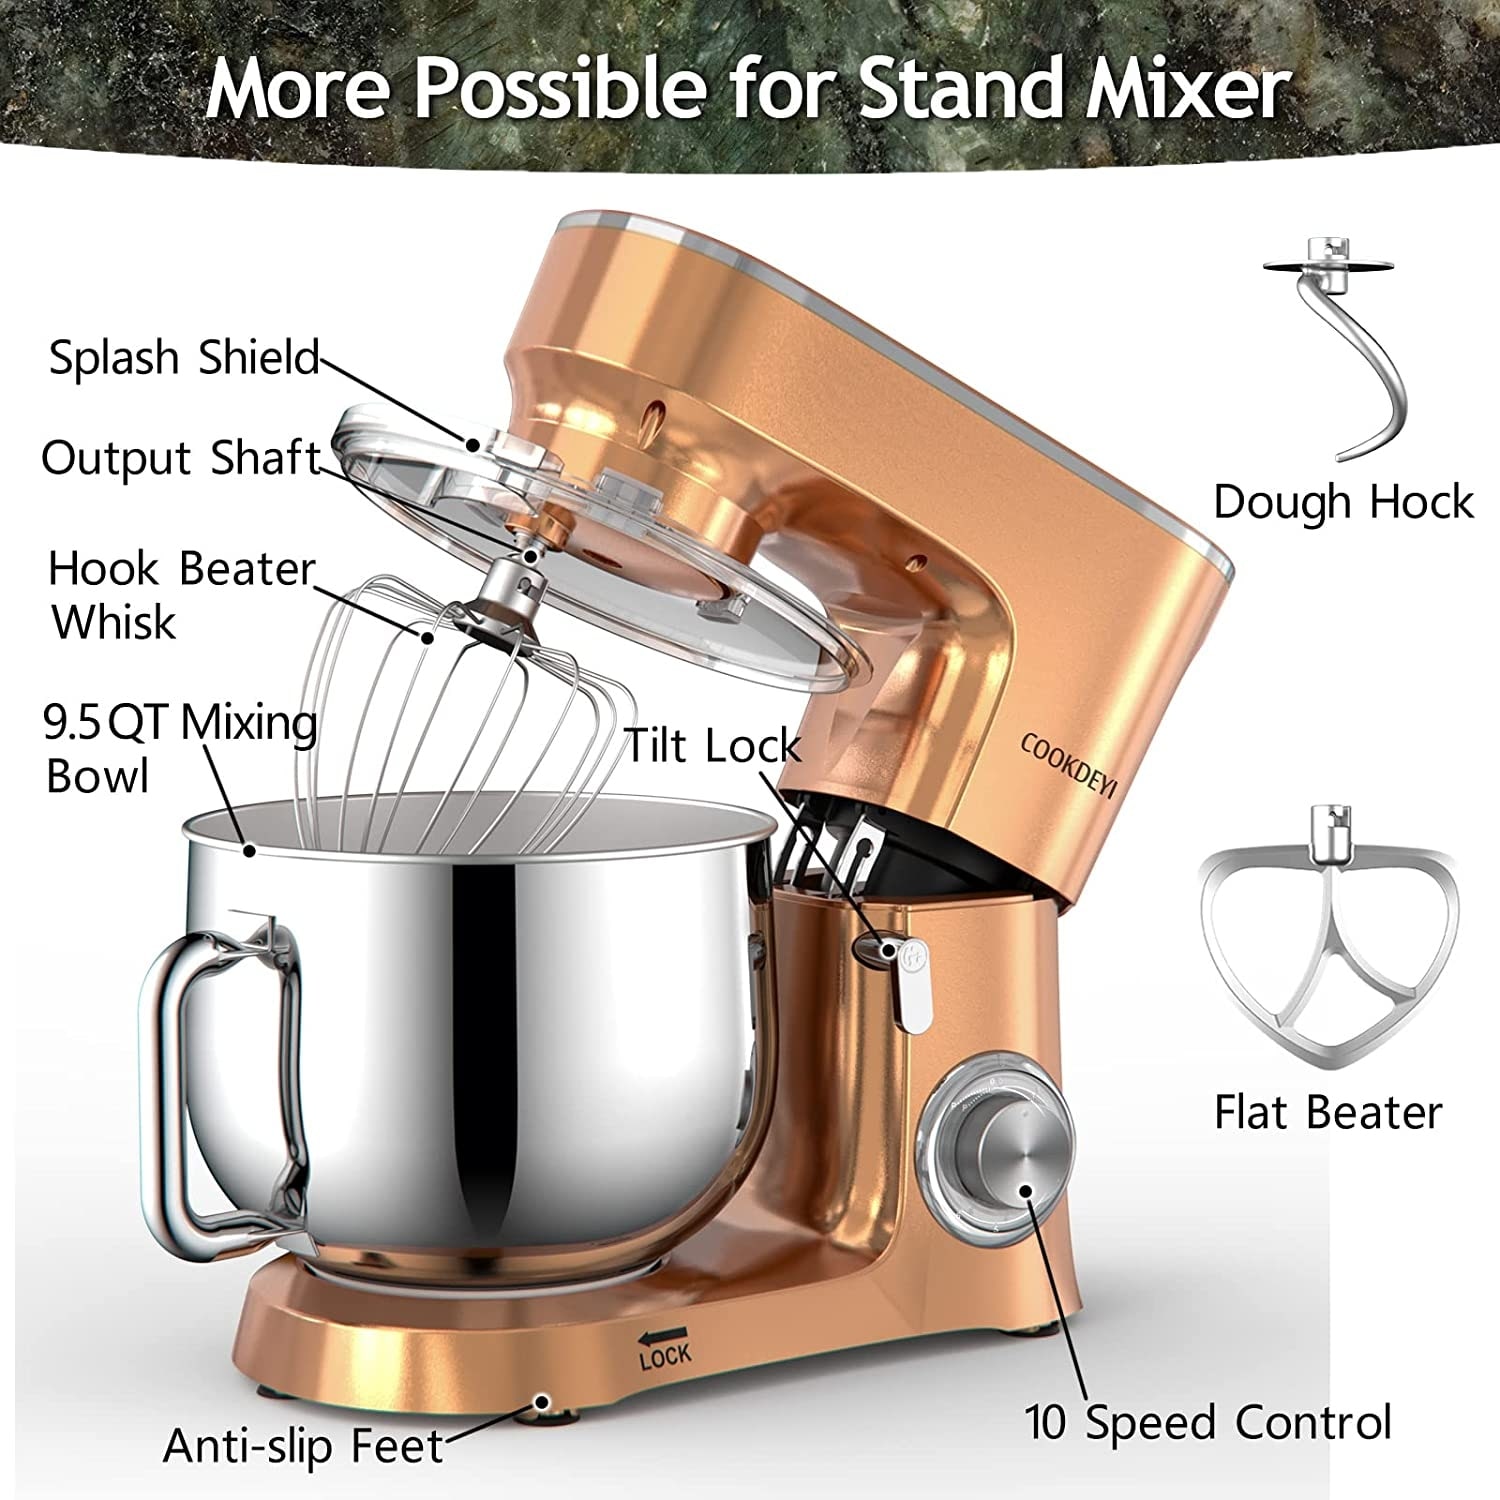 https://ak1.ostkcdn.com/images/products/is/images/direct/a1c4eda00d56e6b5db5b9f87512f8806f2f0feaf/Stand-Mixer%2C-9.5-Qt.-660W-10-Speed-Electric-Kitchen-Mixer-with-Dishwasher-Safe-Dough-Hooks%2C-Flat-Beaters.jpg